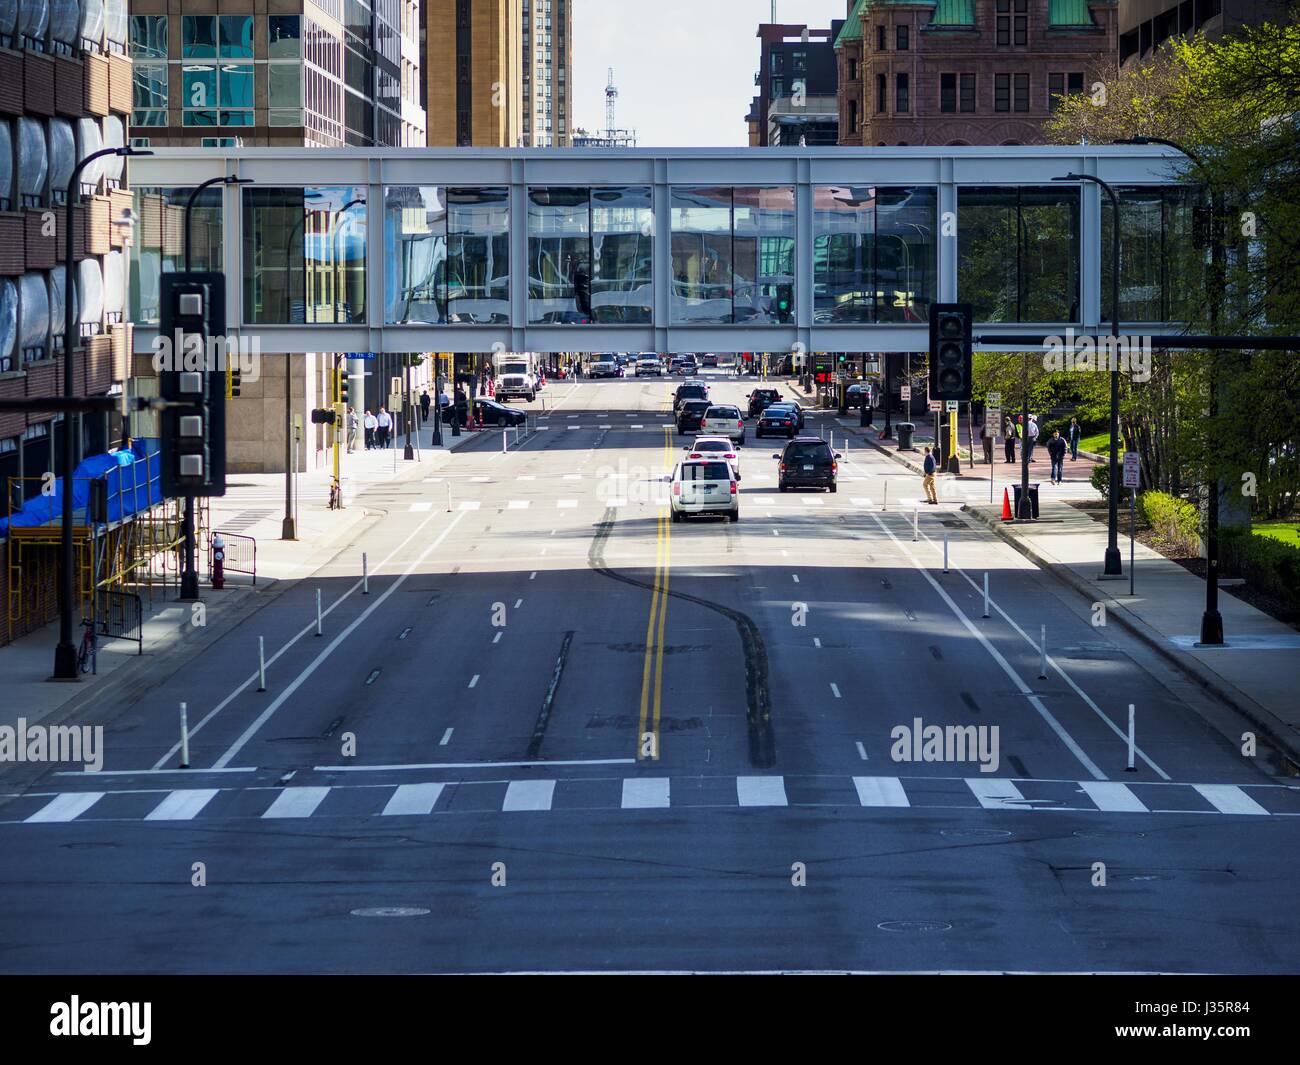 May 3, 2017 - Minneapolis, Minnesota, U.S - A pedestrian skyway crossing 3rd Ave in Minneapolis. The skyways are enclosed pedestrian overpasses that connect downtown buildings. The Minneapolis Skyway was started in the early 1960s as a response to covered shopping malls in the suburbs that were drawing shoppers out of the downtown area. The system grew sporadically until 1974, when the construction of the IDS Center and its center atrium, called the Crystal Court, served as a hub for the downtown skyway system. There are 8 miles of skyways, connecting most of the downtown buildings from Target Stock Photo